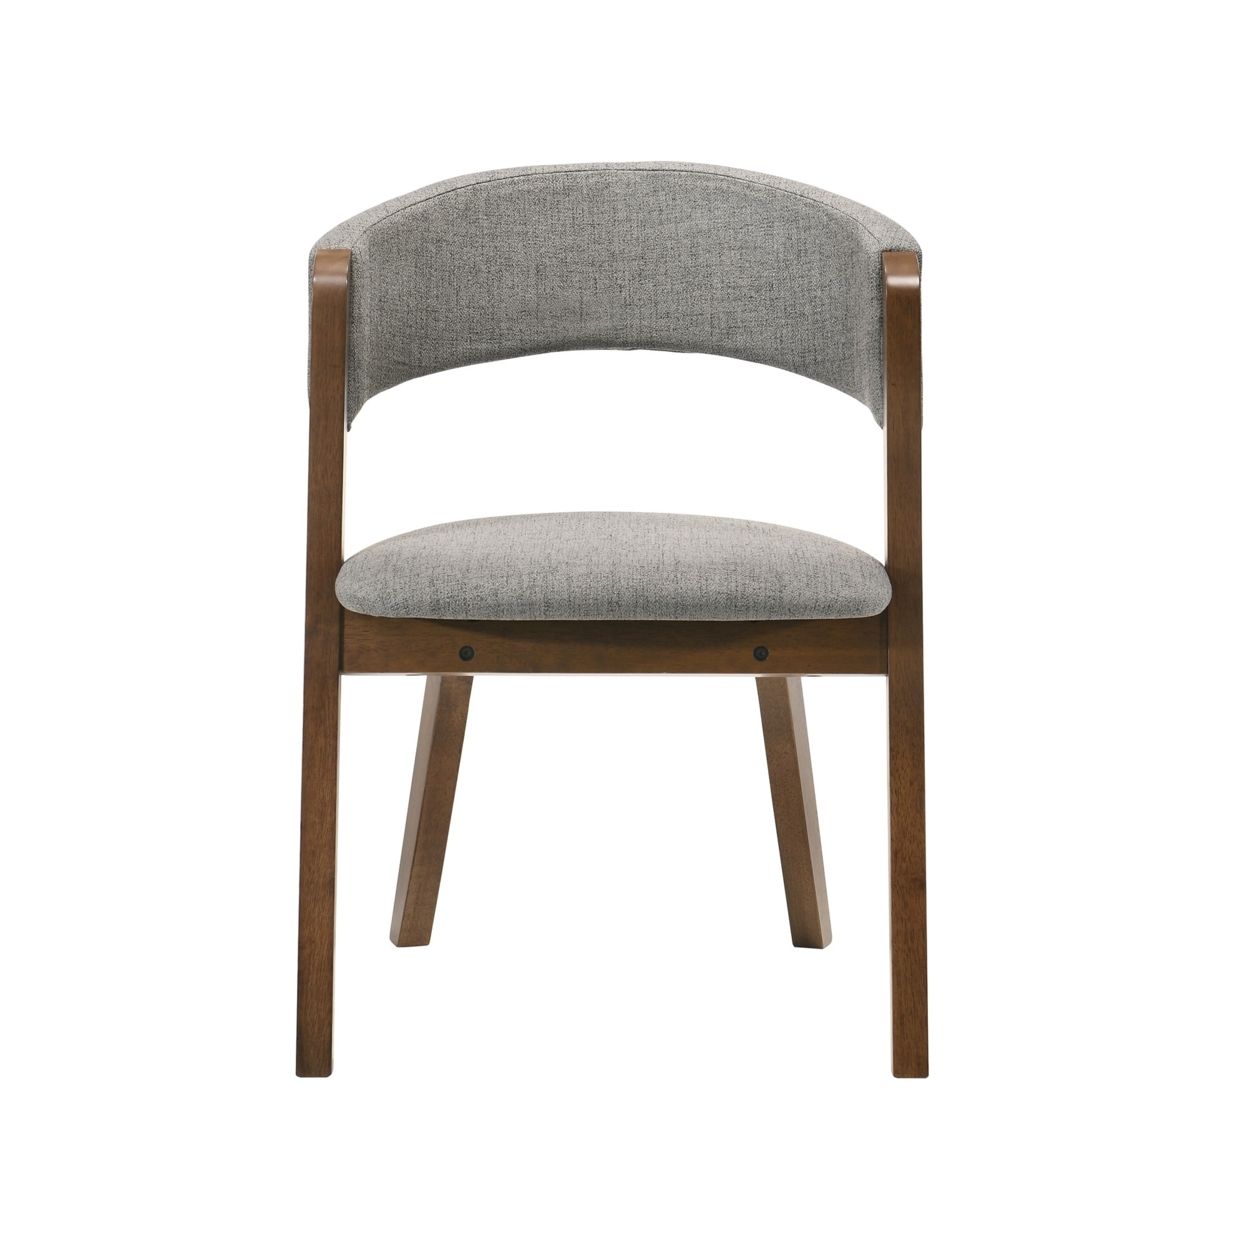 Fabric Upholstered Round Back Wood Dining Chair, Set Of 2, Brown And Gray- Saltoro Sherpi